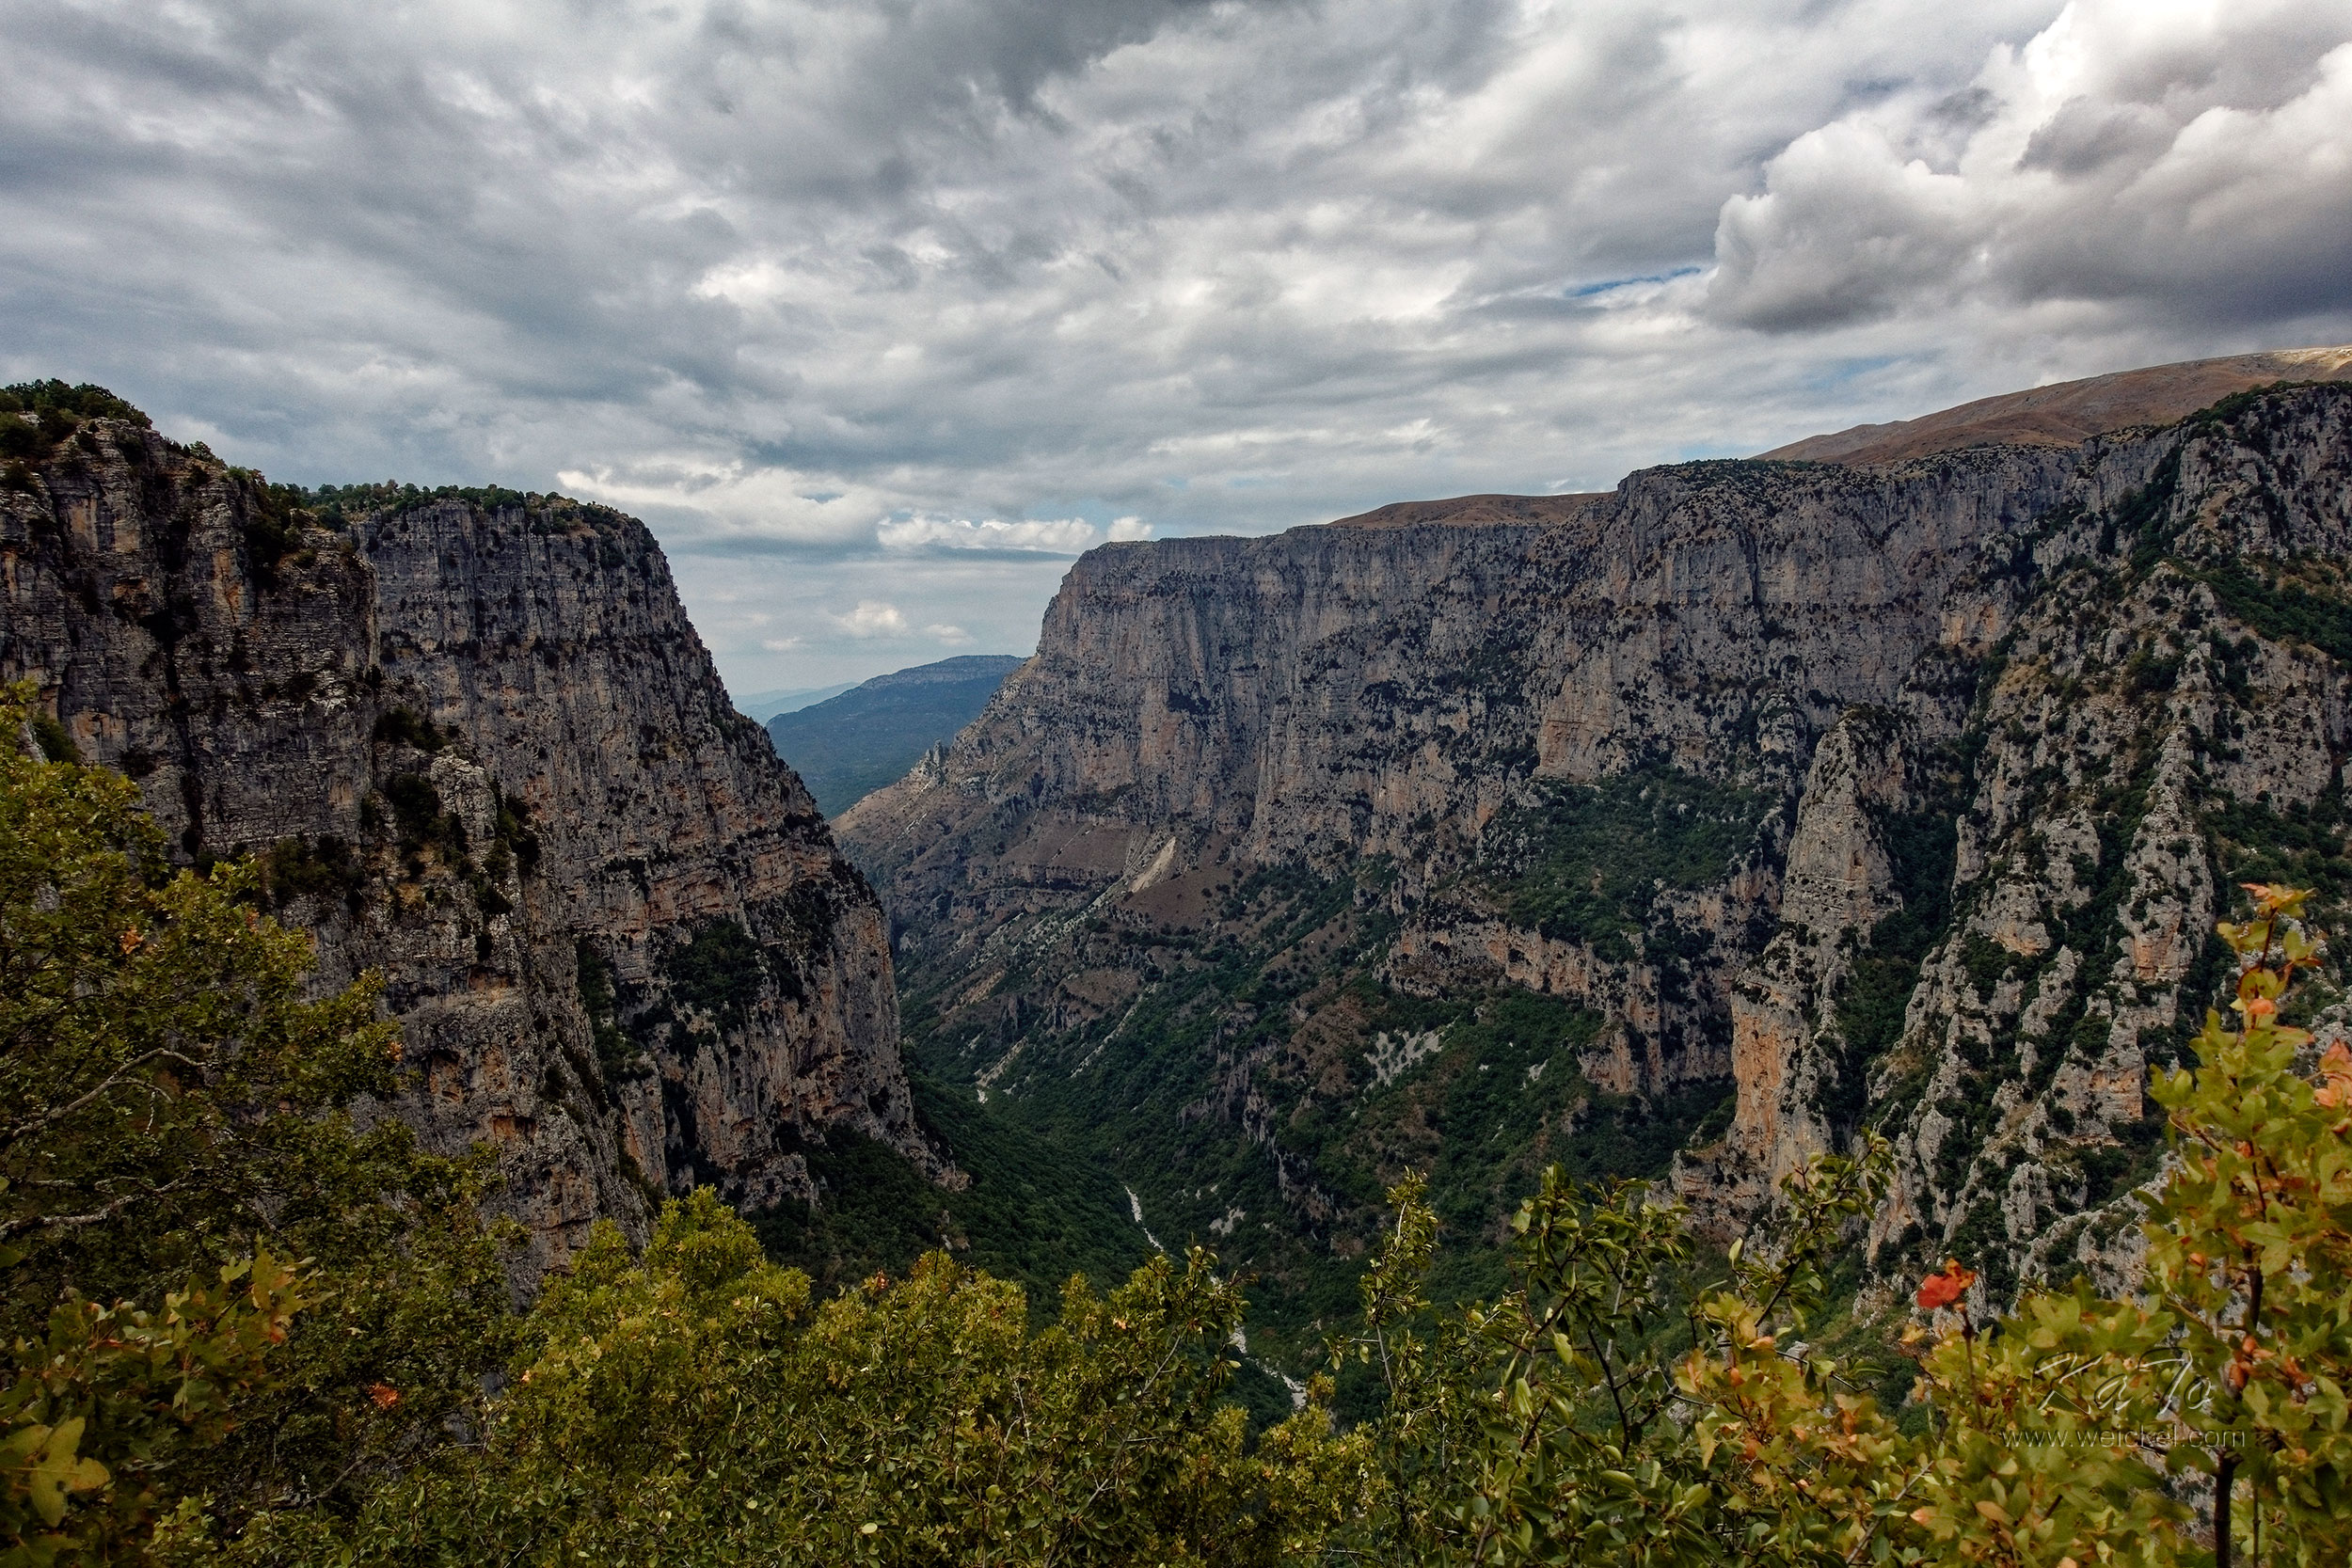 Vikos Gorge - with a depth up to 1350m